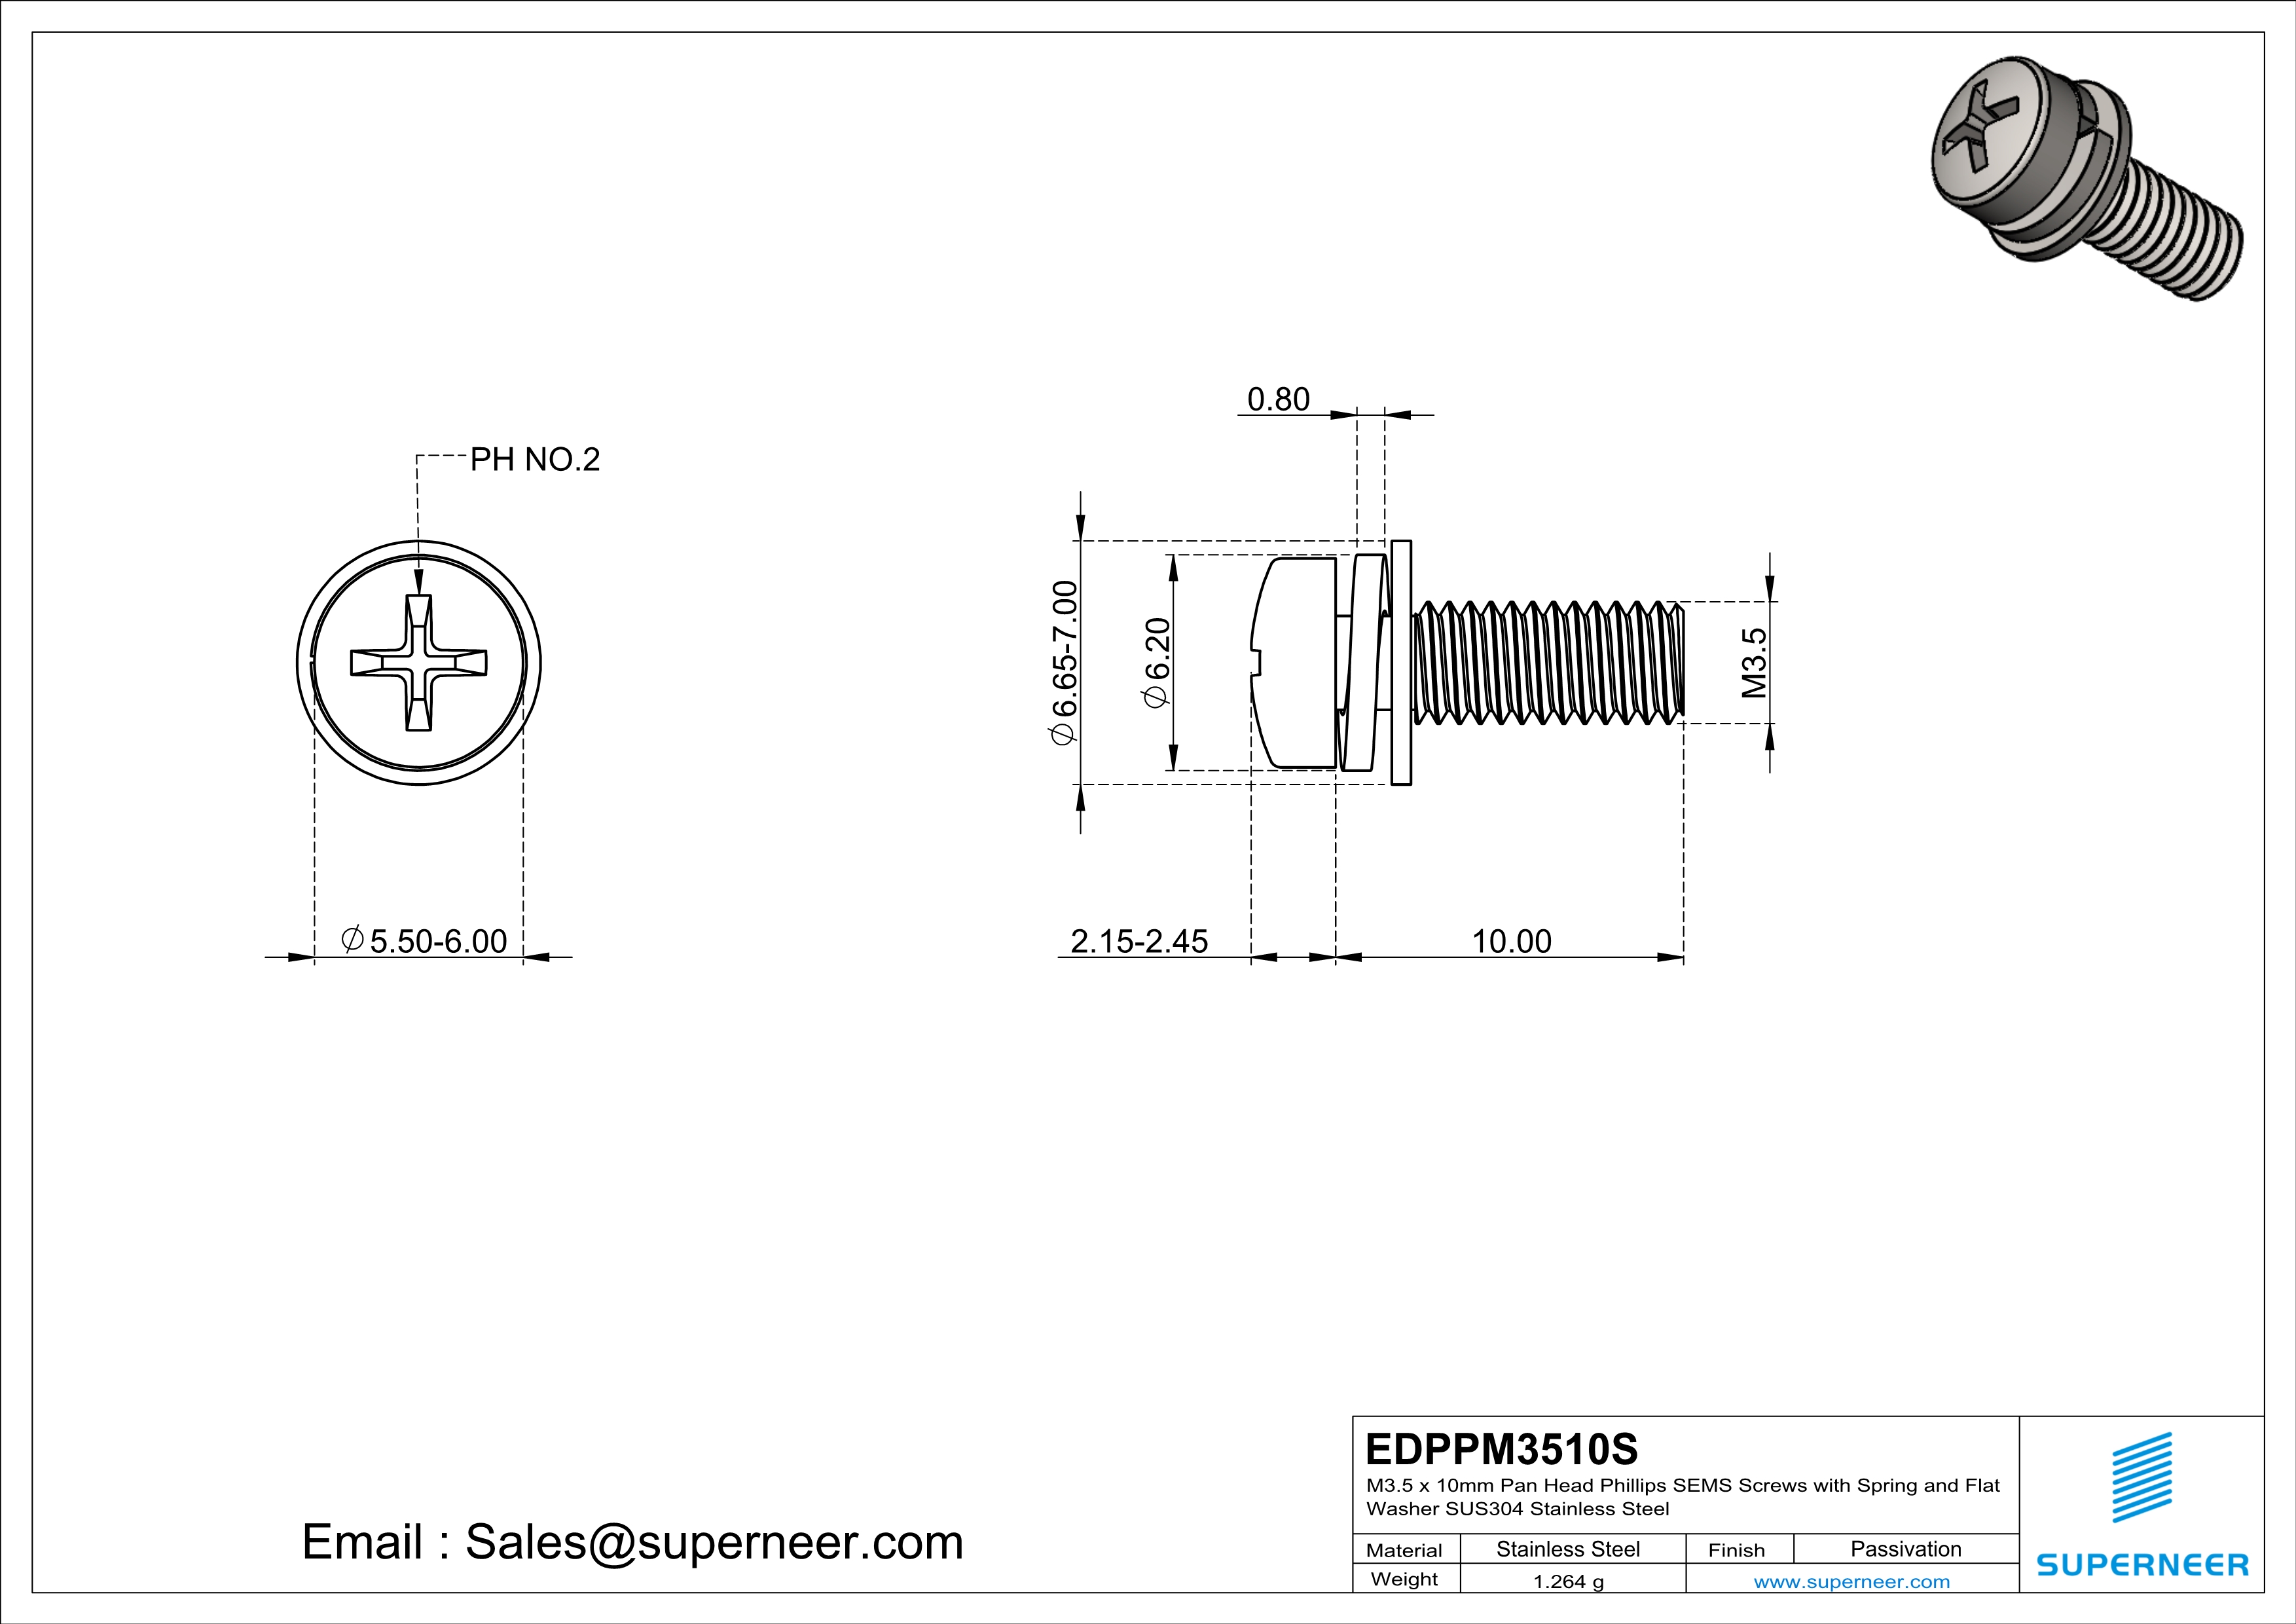 M3.5 x 10mm Pan Head Phillips SEMS Screws with Spring and Flat Washer SUS304 Stainless Steel Inox